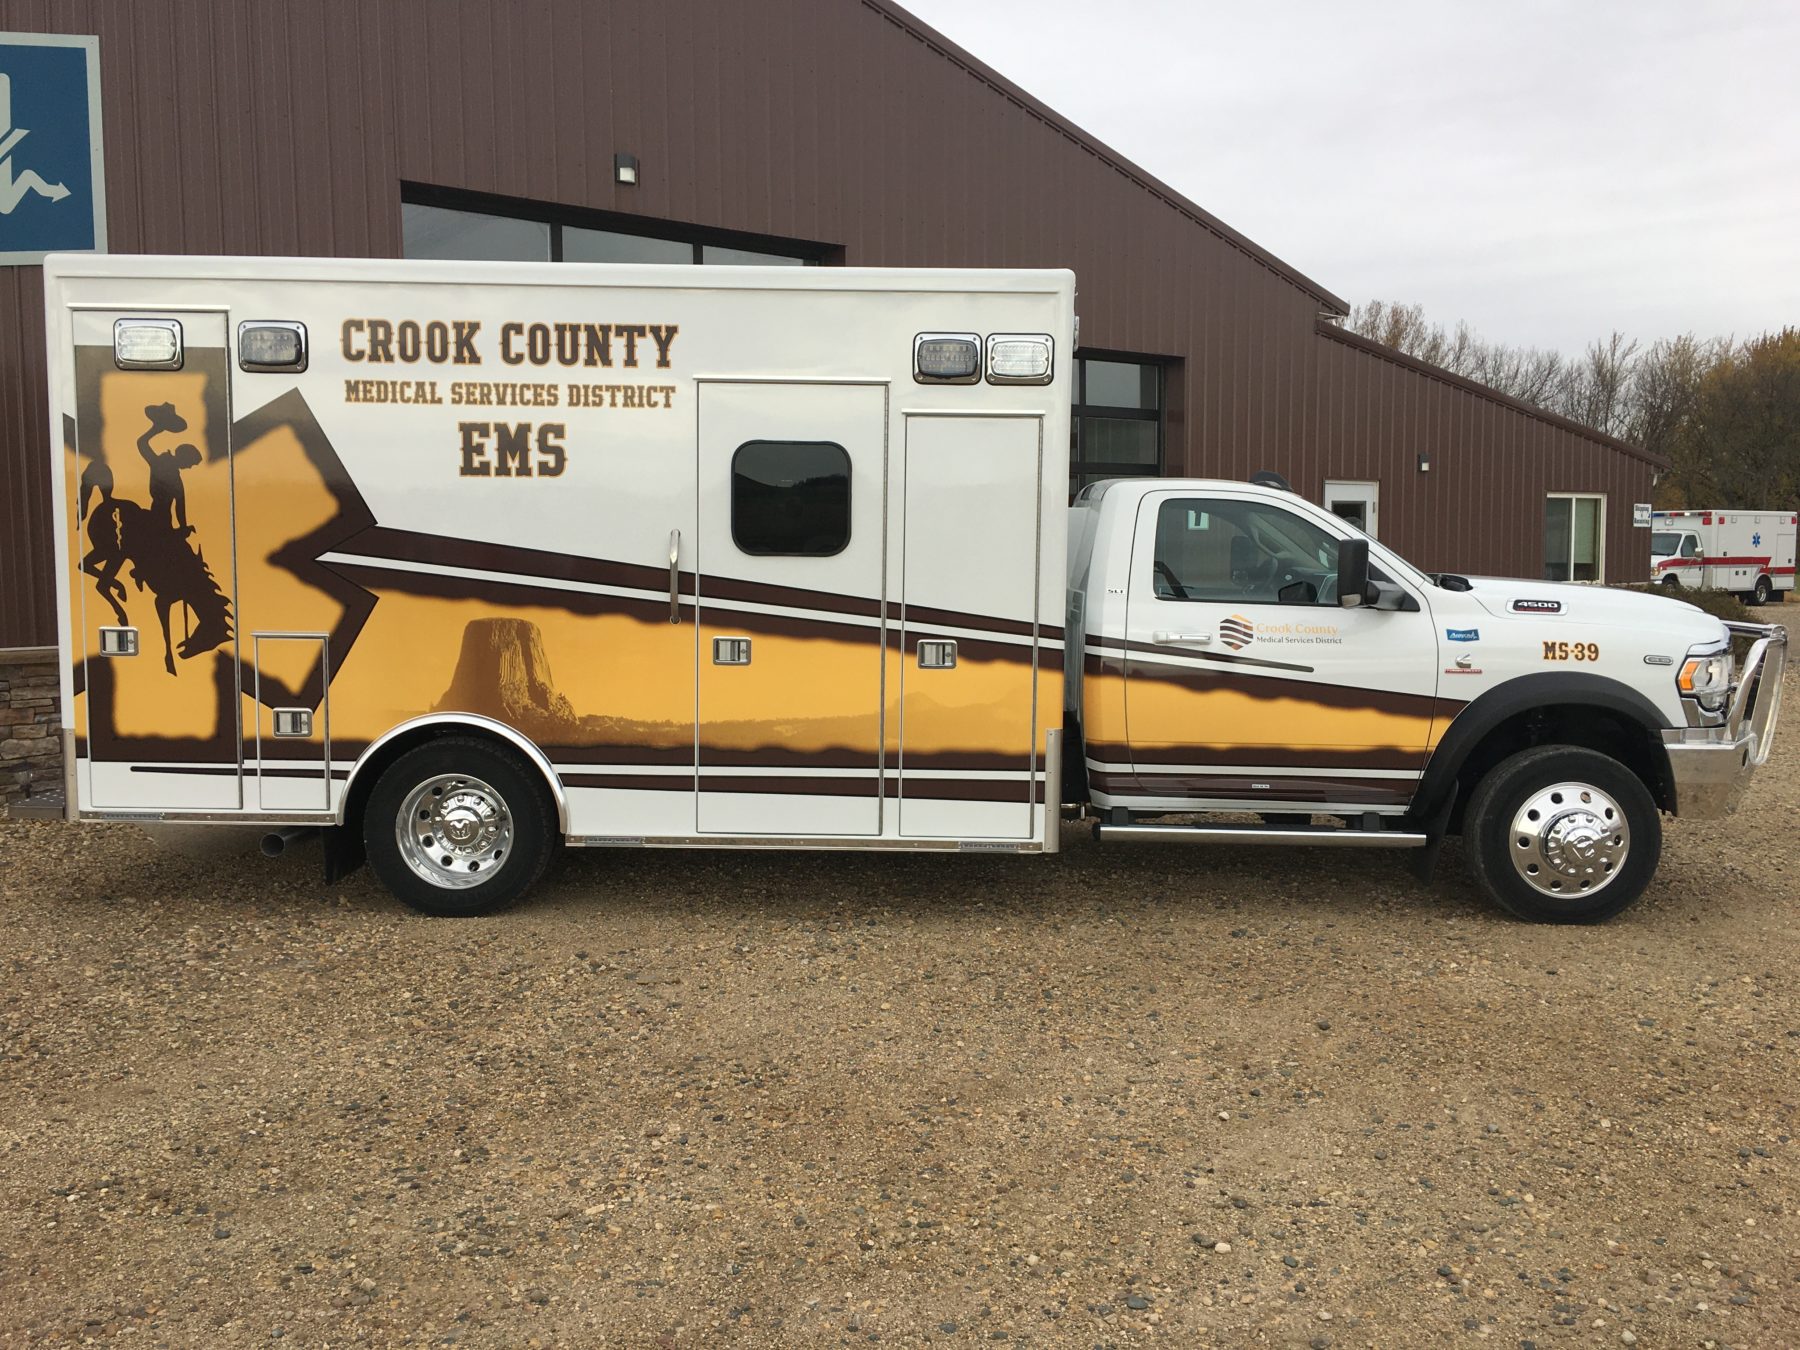 2019 Ram 4500 4x4 Heavy Duty Ambulance For Sale – Picture 4